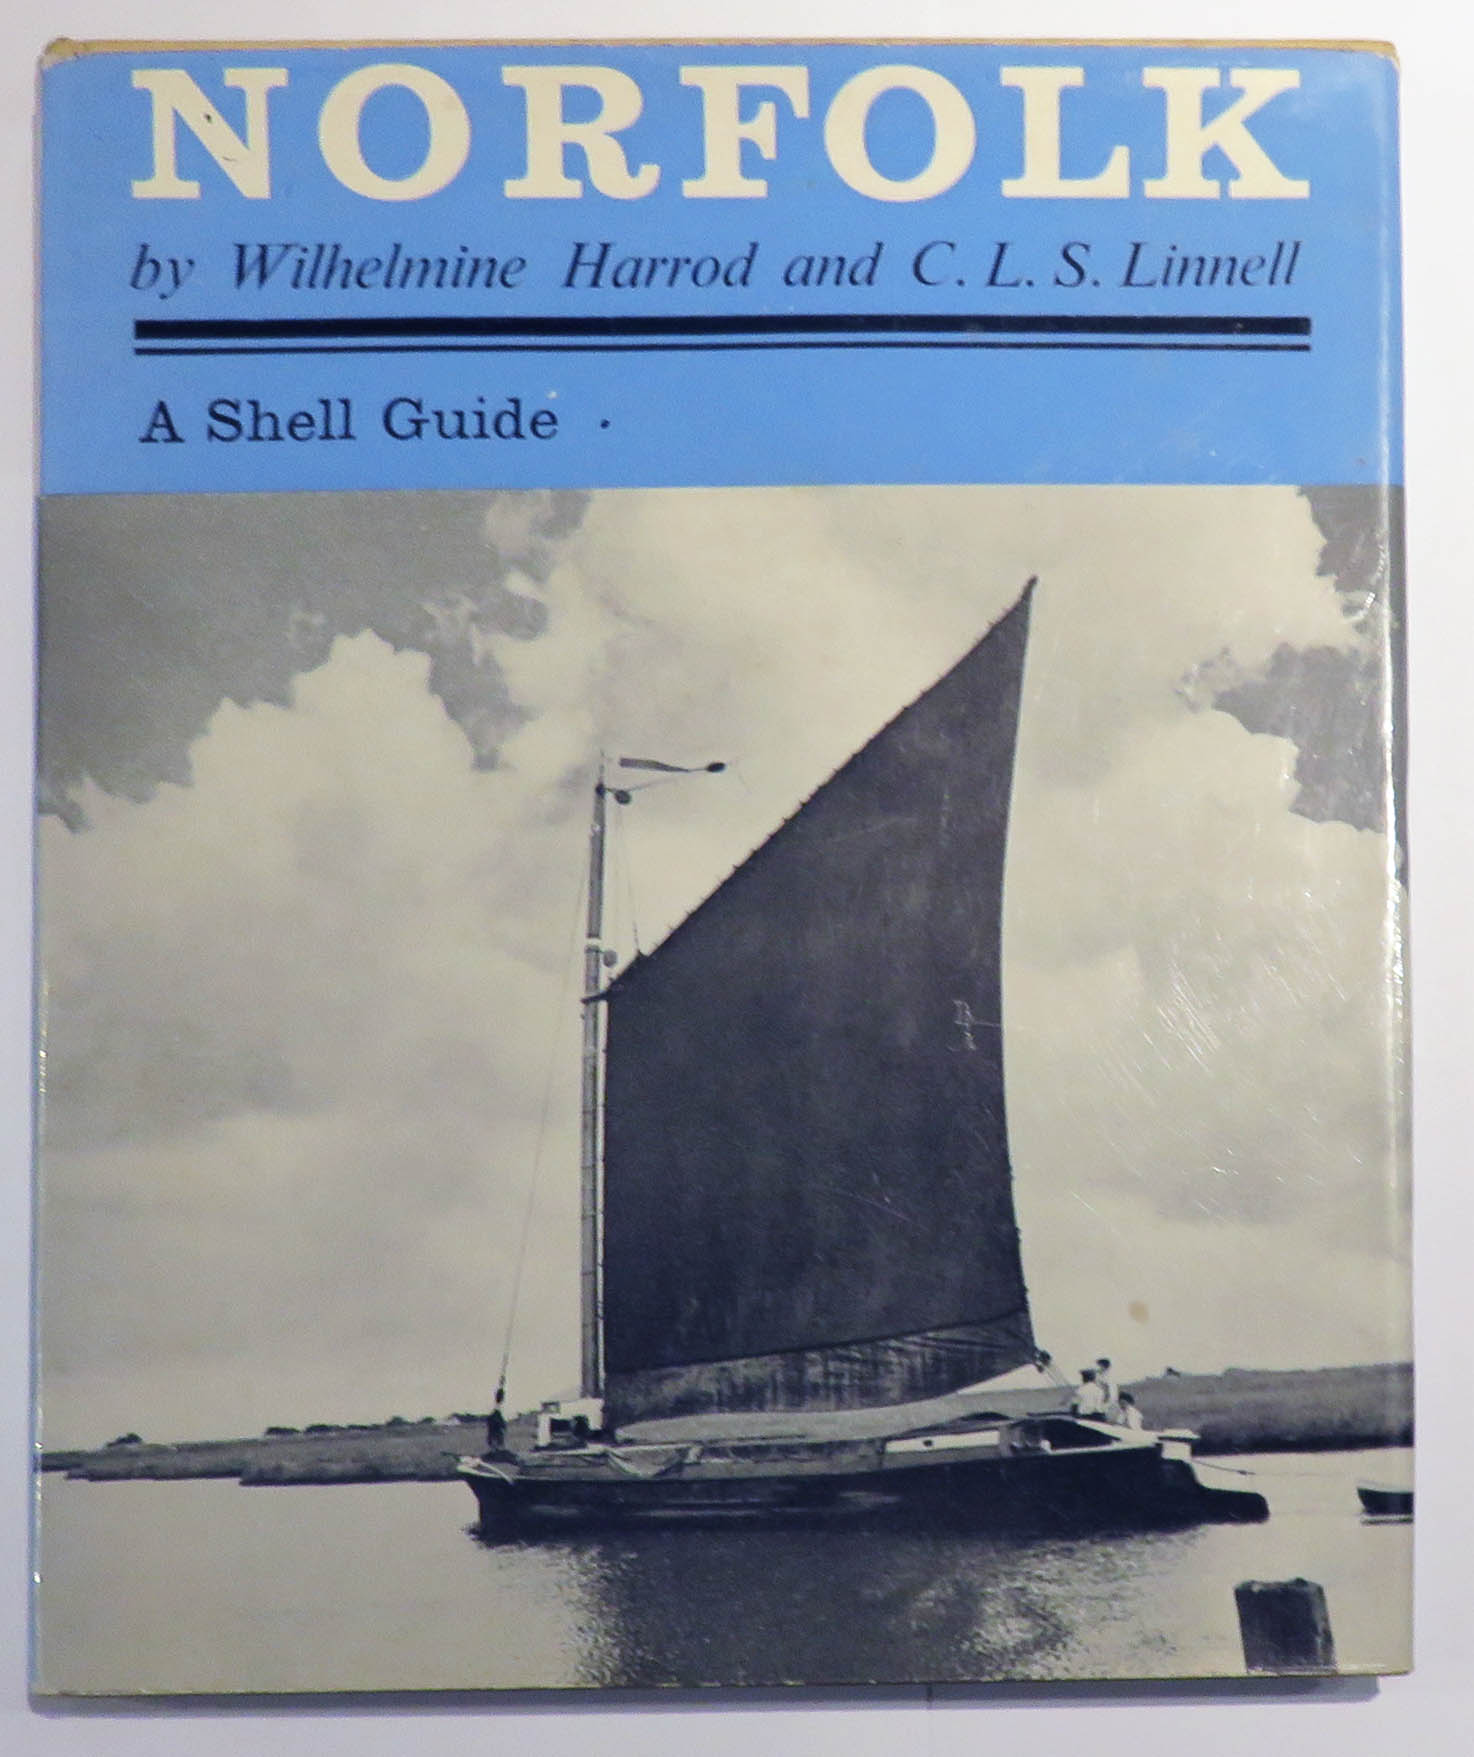 A Shell Guide to Norfolk 